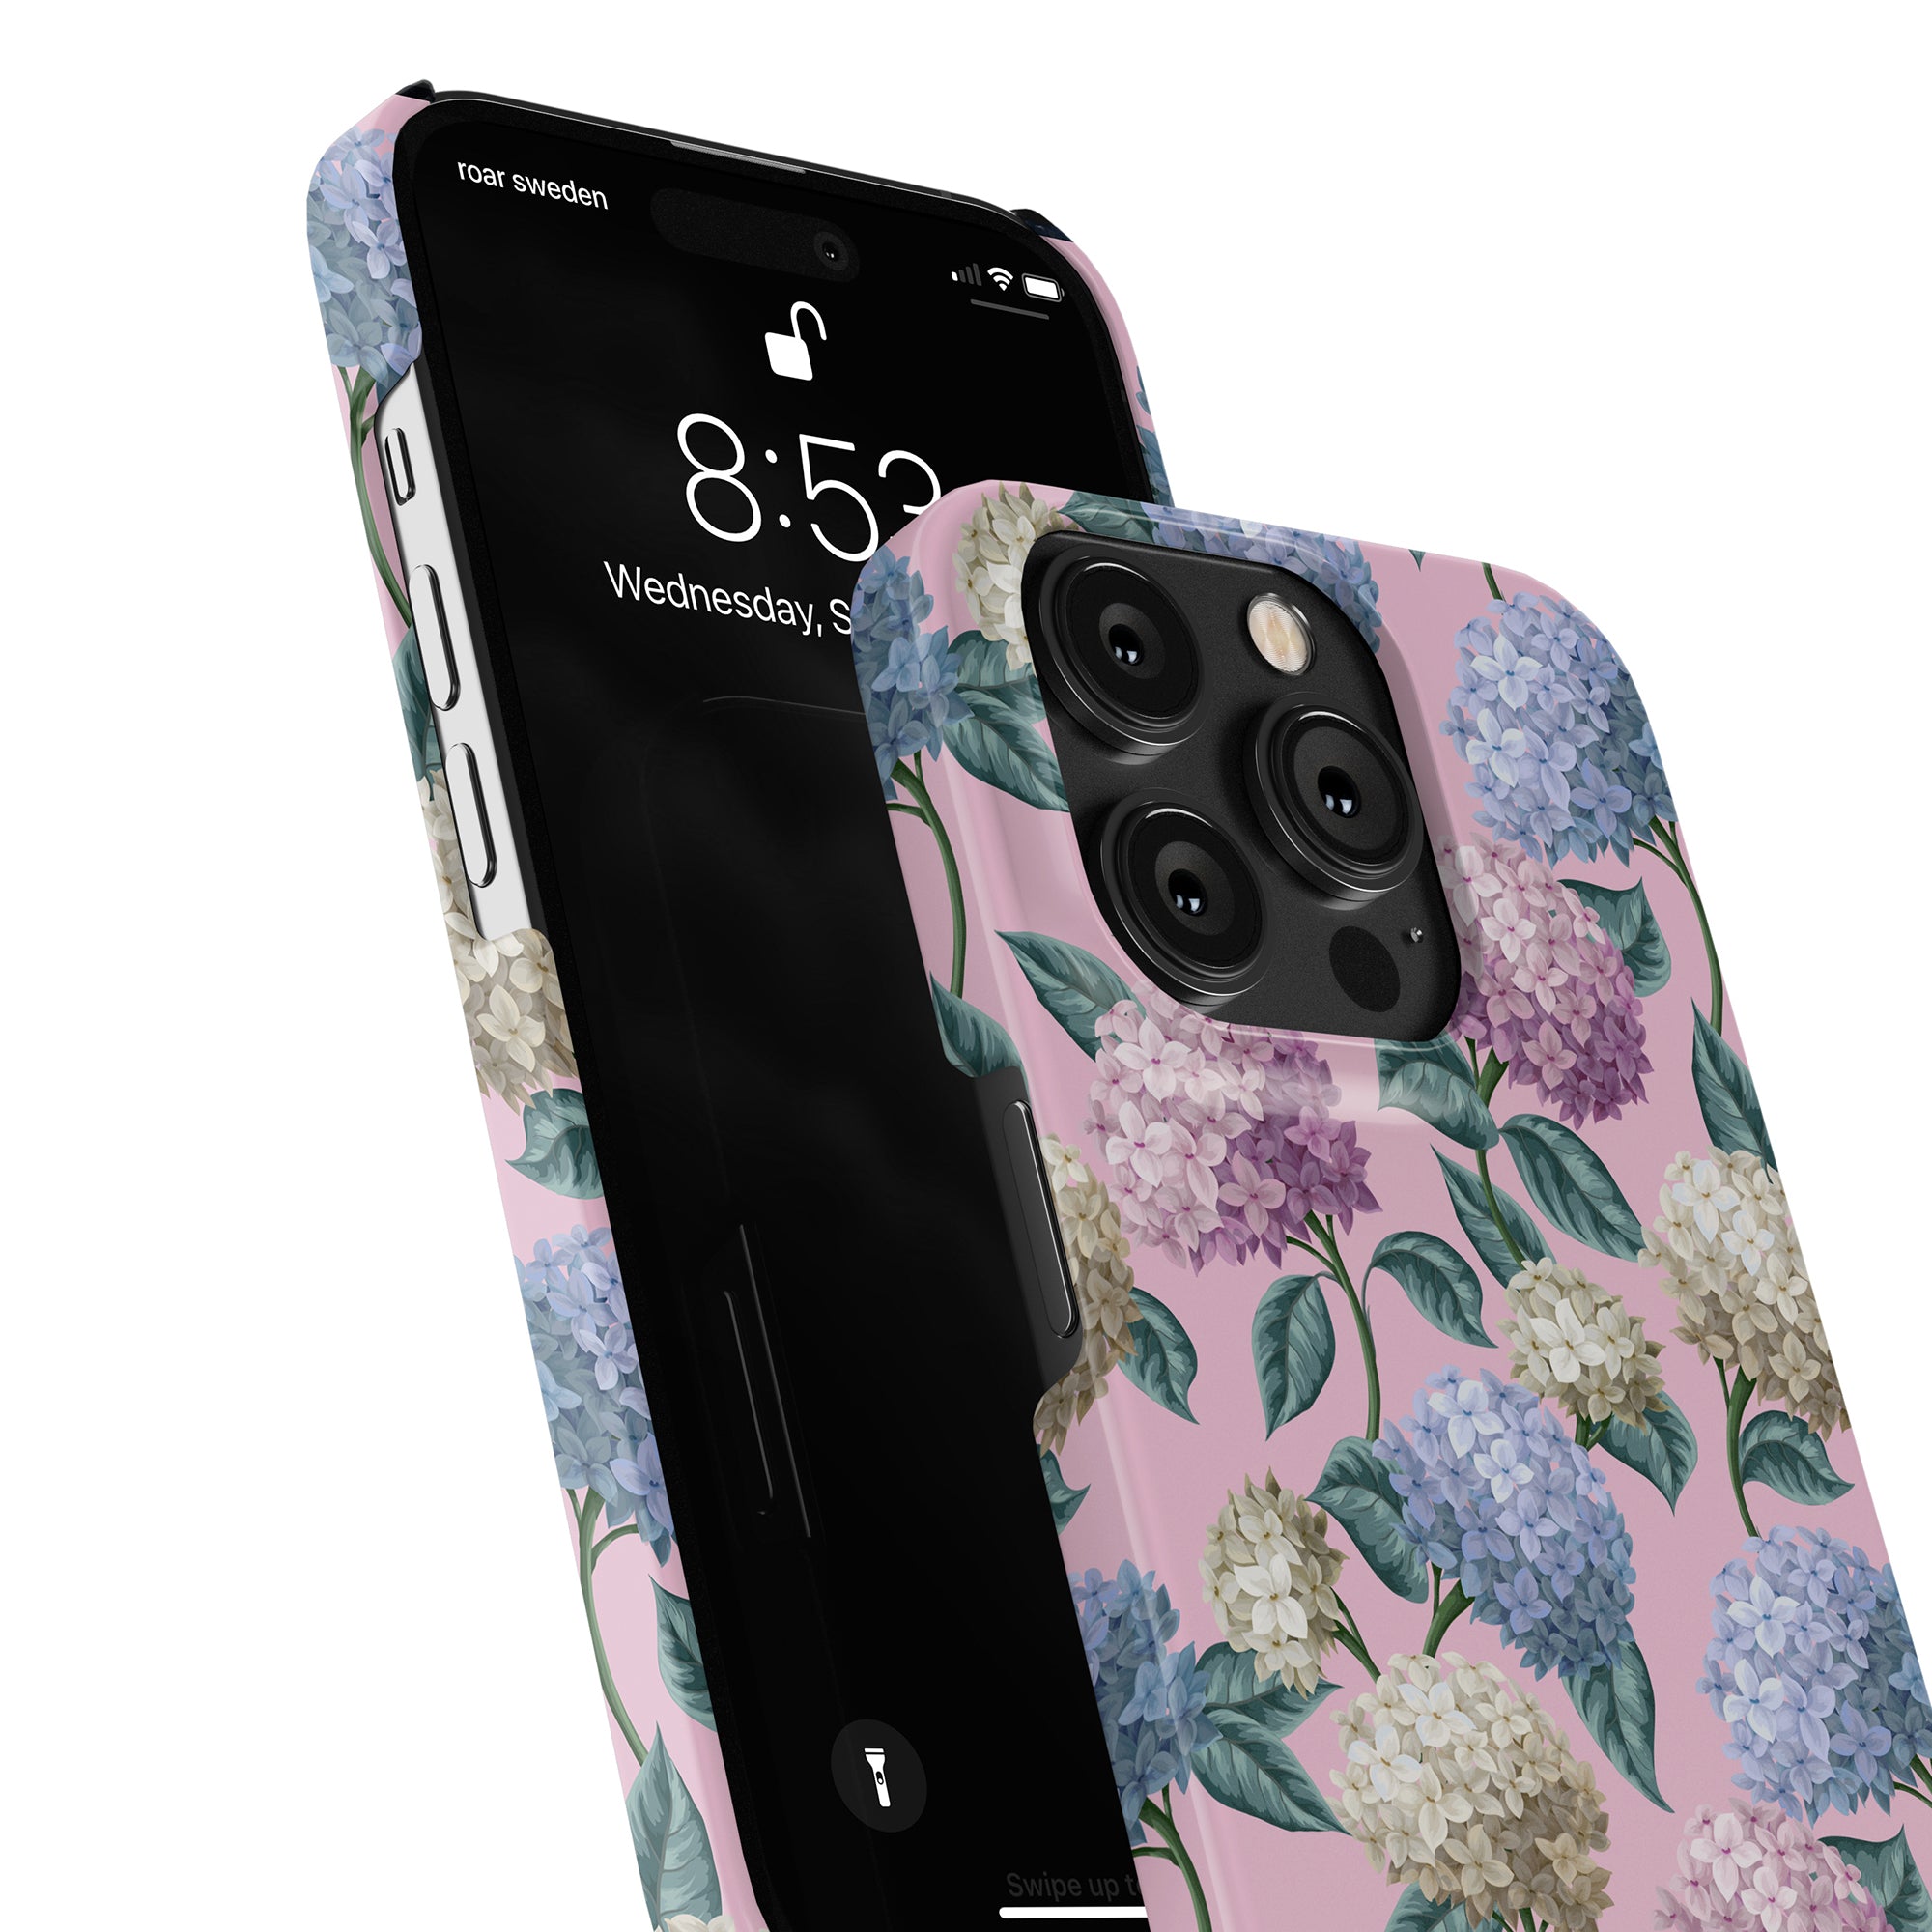 A smartphone with a Hydrangea - Slim case displaying the lock screen with the date and time as Wednesday, September 14, 8:53. This sommarkollektion piece adds a touch of elegance while offering a skyddande mobilskal.